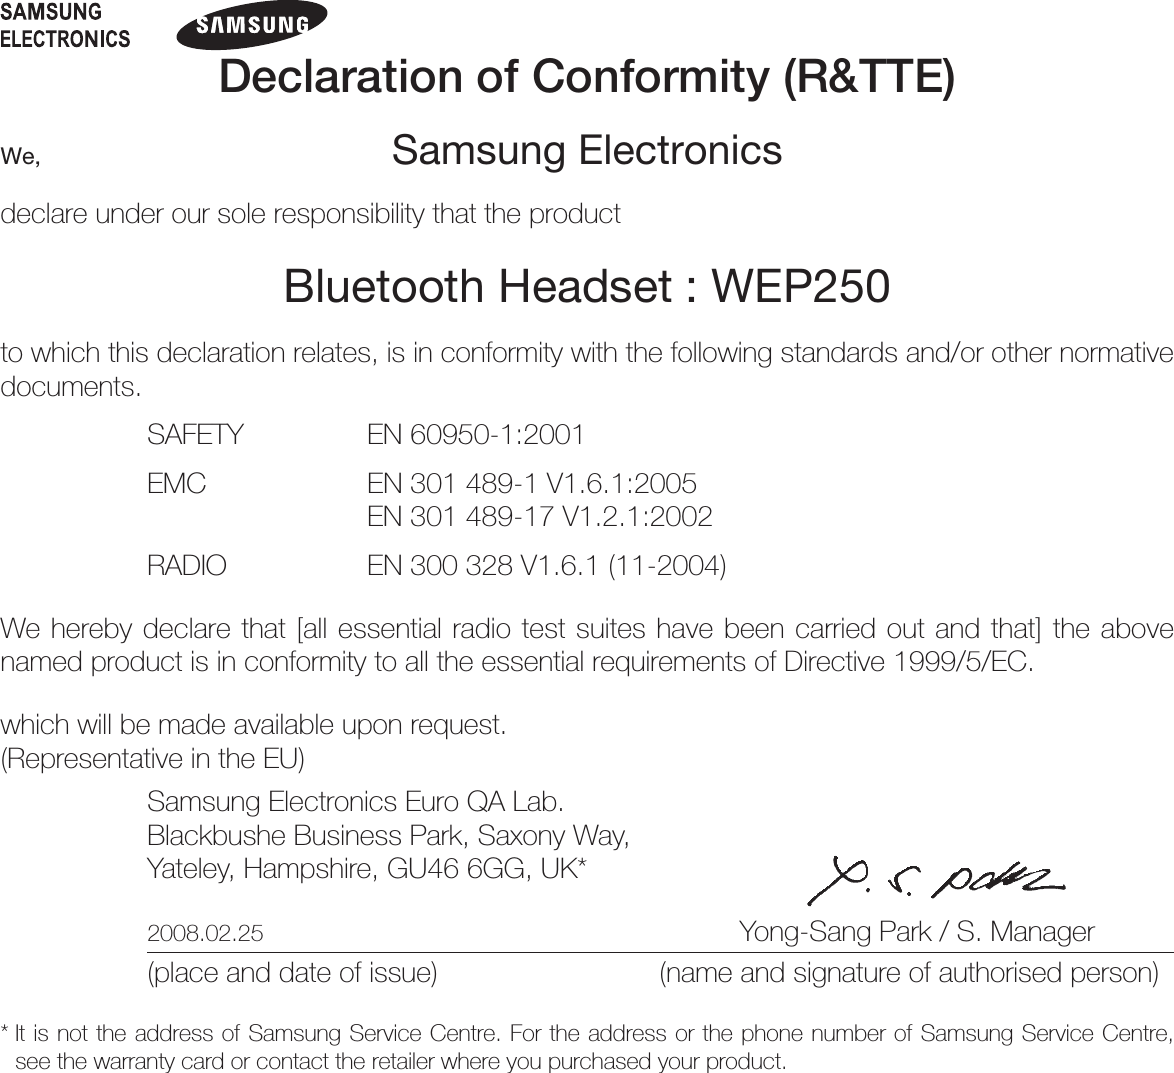 Declaration of Conformity (R&amp;TTE)We, Samsung Electronicsdeclare under our sole responsibility that the productBluetooth Headset : WEP250to which this declaration relates, is in conformity with the following standards and/or other normative documents.SAFETY   EN 60950-1:2001EMC   EN 301 489-1 V1.6.1:2005  EN 301 489-17 V1.2.1:2002RADIO   EN 300 328 V1.6.1 (11-2004)We hereby declare that [all essential radio test suites have been carried out and that] the above named product is in conformity to all the essential requirements of Directive 1999/5/EC.which will be made available upon request.(Representative in the EU)Samsung Electronics Euro QA Lab.Blackbushe Business Park, Saxony Way,Yateley, Hampshire, GU46 6GG, UK* 2008.02.25  Yong-Sang Park / S. Manager(place and date of issue)  (name and signature of authorised person)*  It is not the address of Samsung Service Centre. For the address or the phone number of Samsung Service Centre, see the warranty card or contact the retailer where you purchased your product.